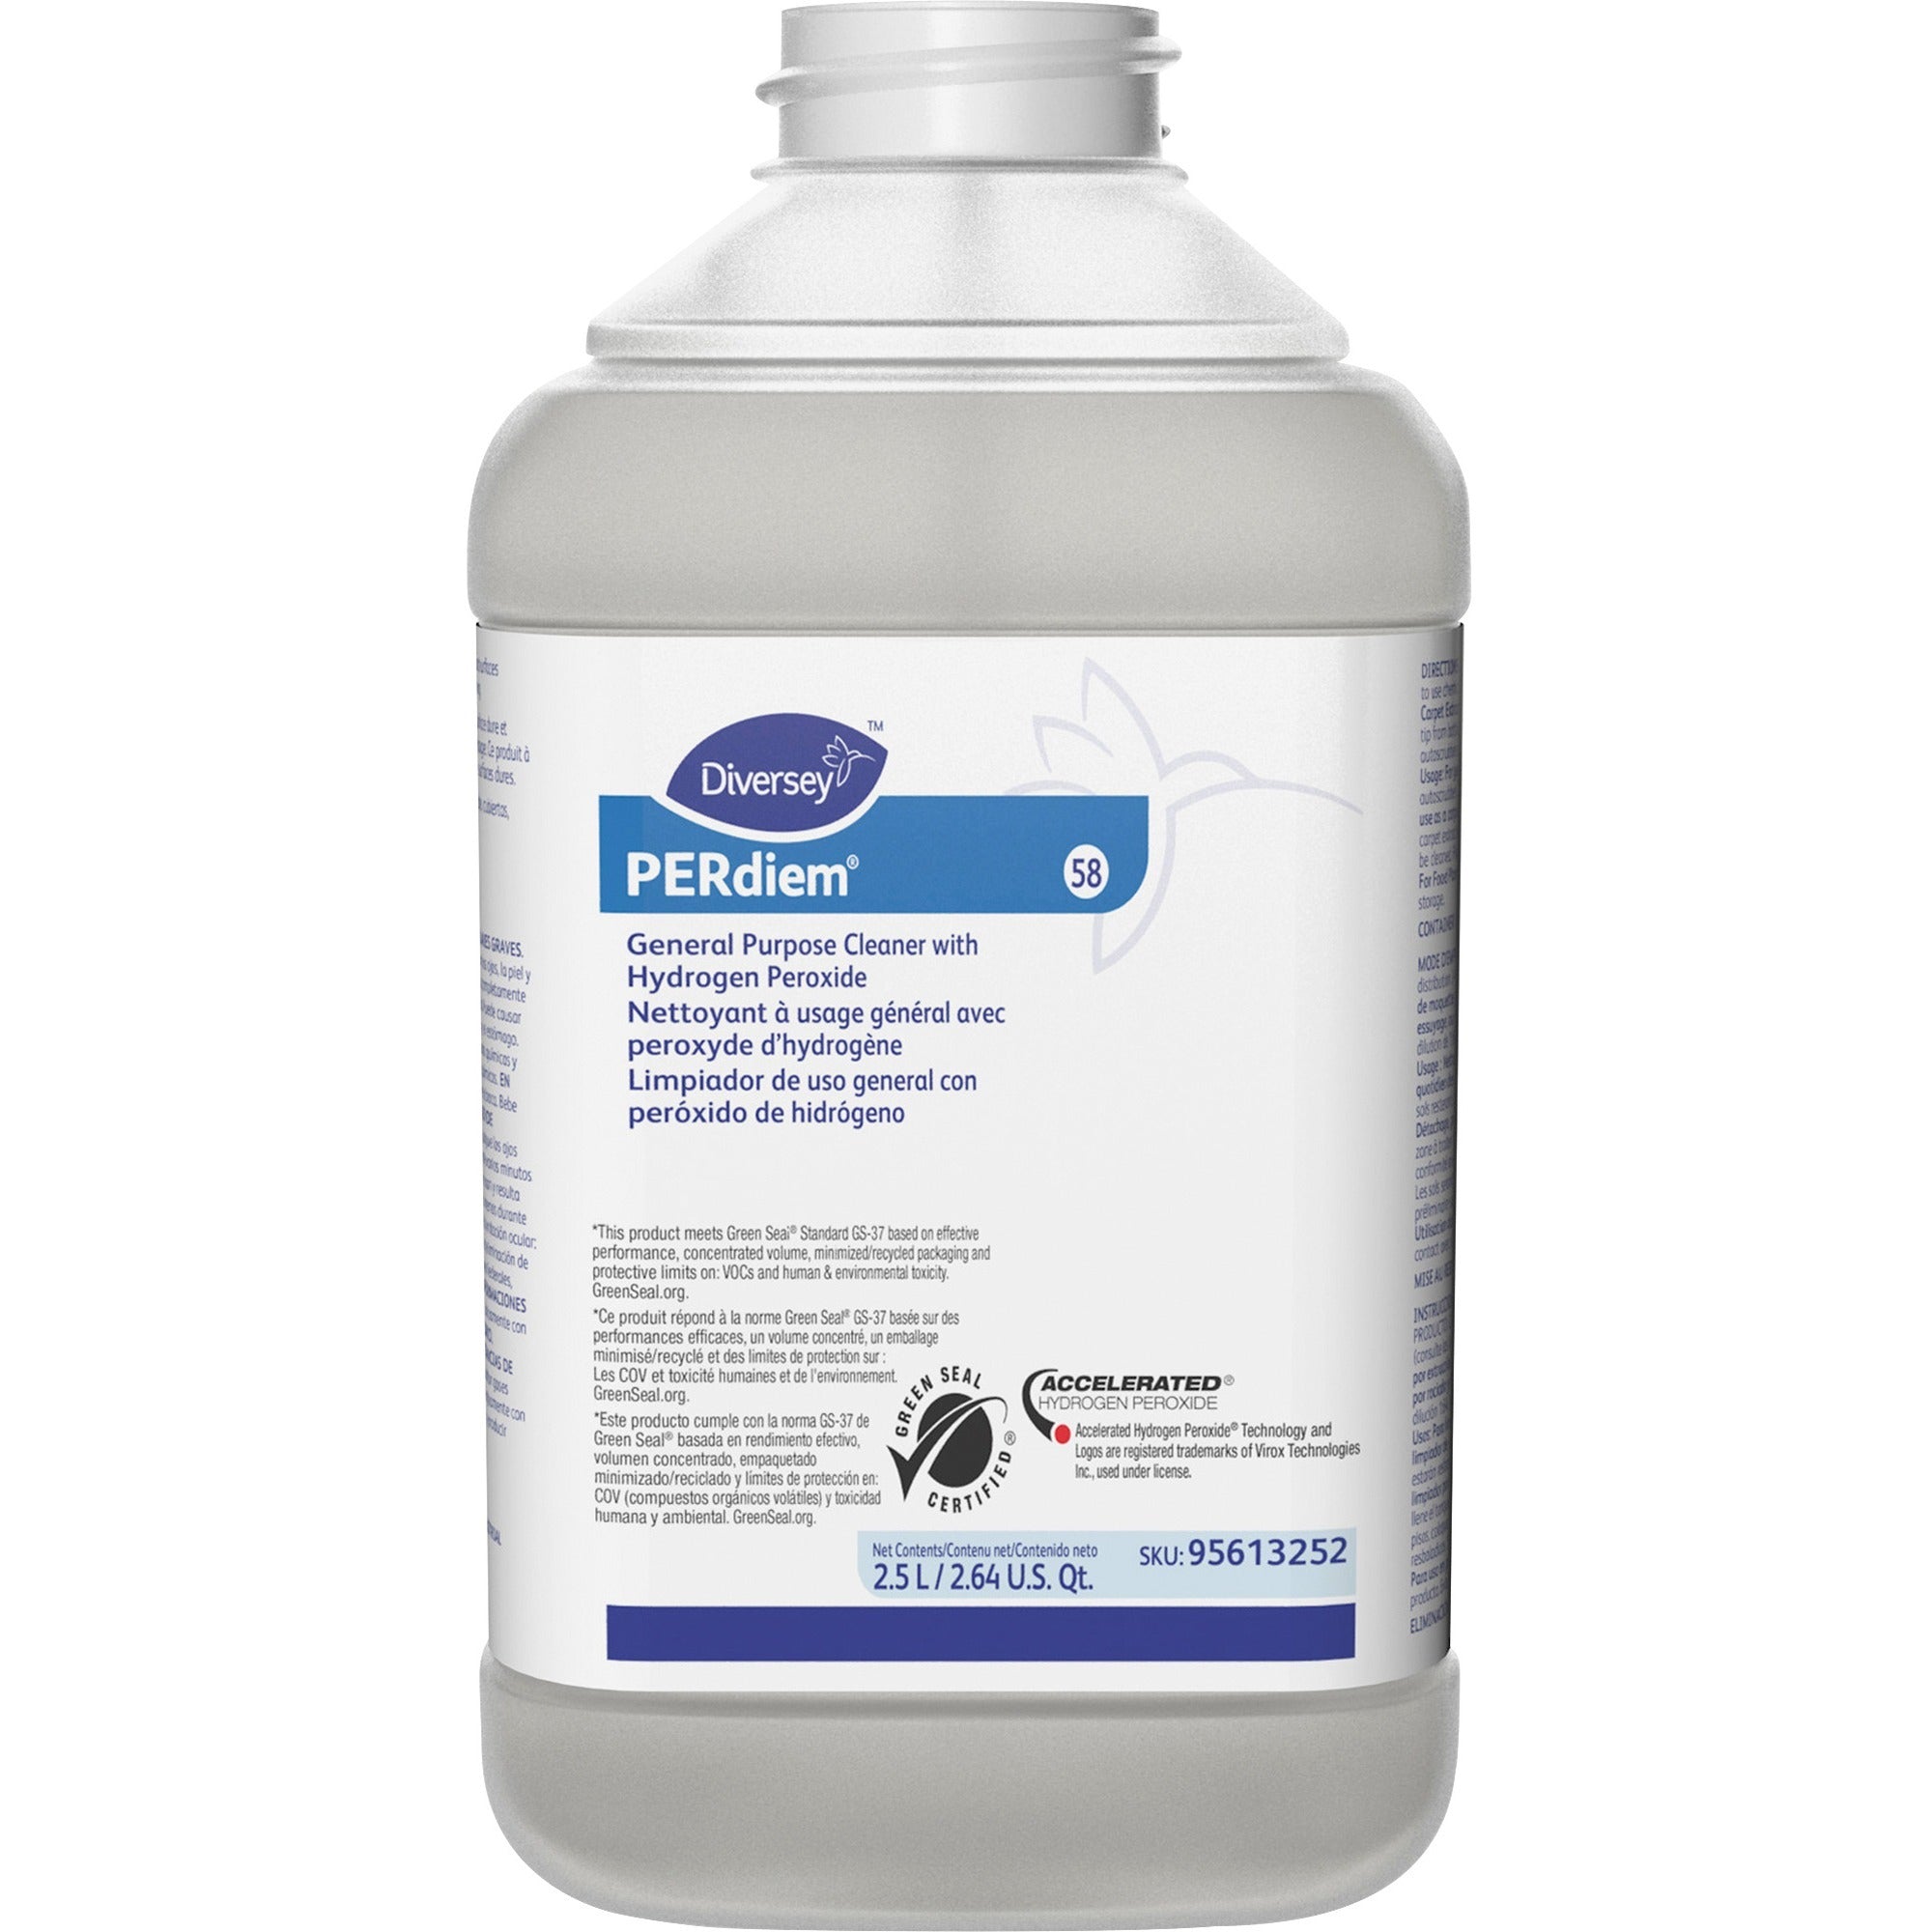 perdiem-general-purpose-cleaner-with-hydrogen-peroxide-concentrate-845-fl-oz-26-quartbottle-1-each-heavy-duty-dilutable-phosphorous-free-odorless-color-free-clear_dvo95613252 - 1